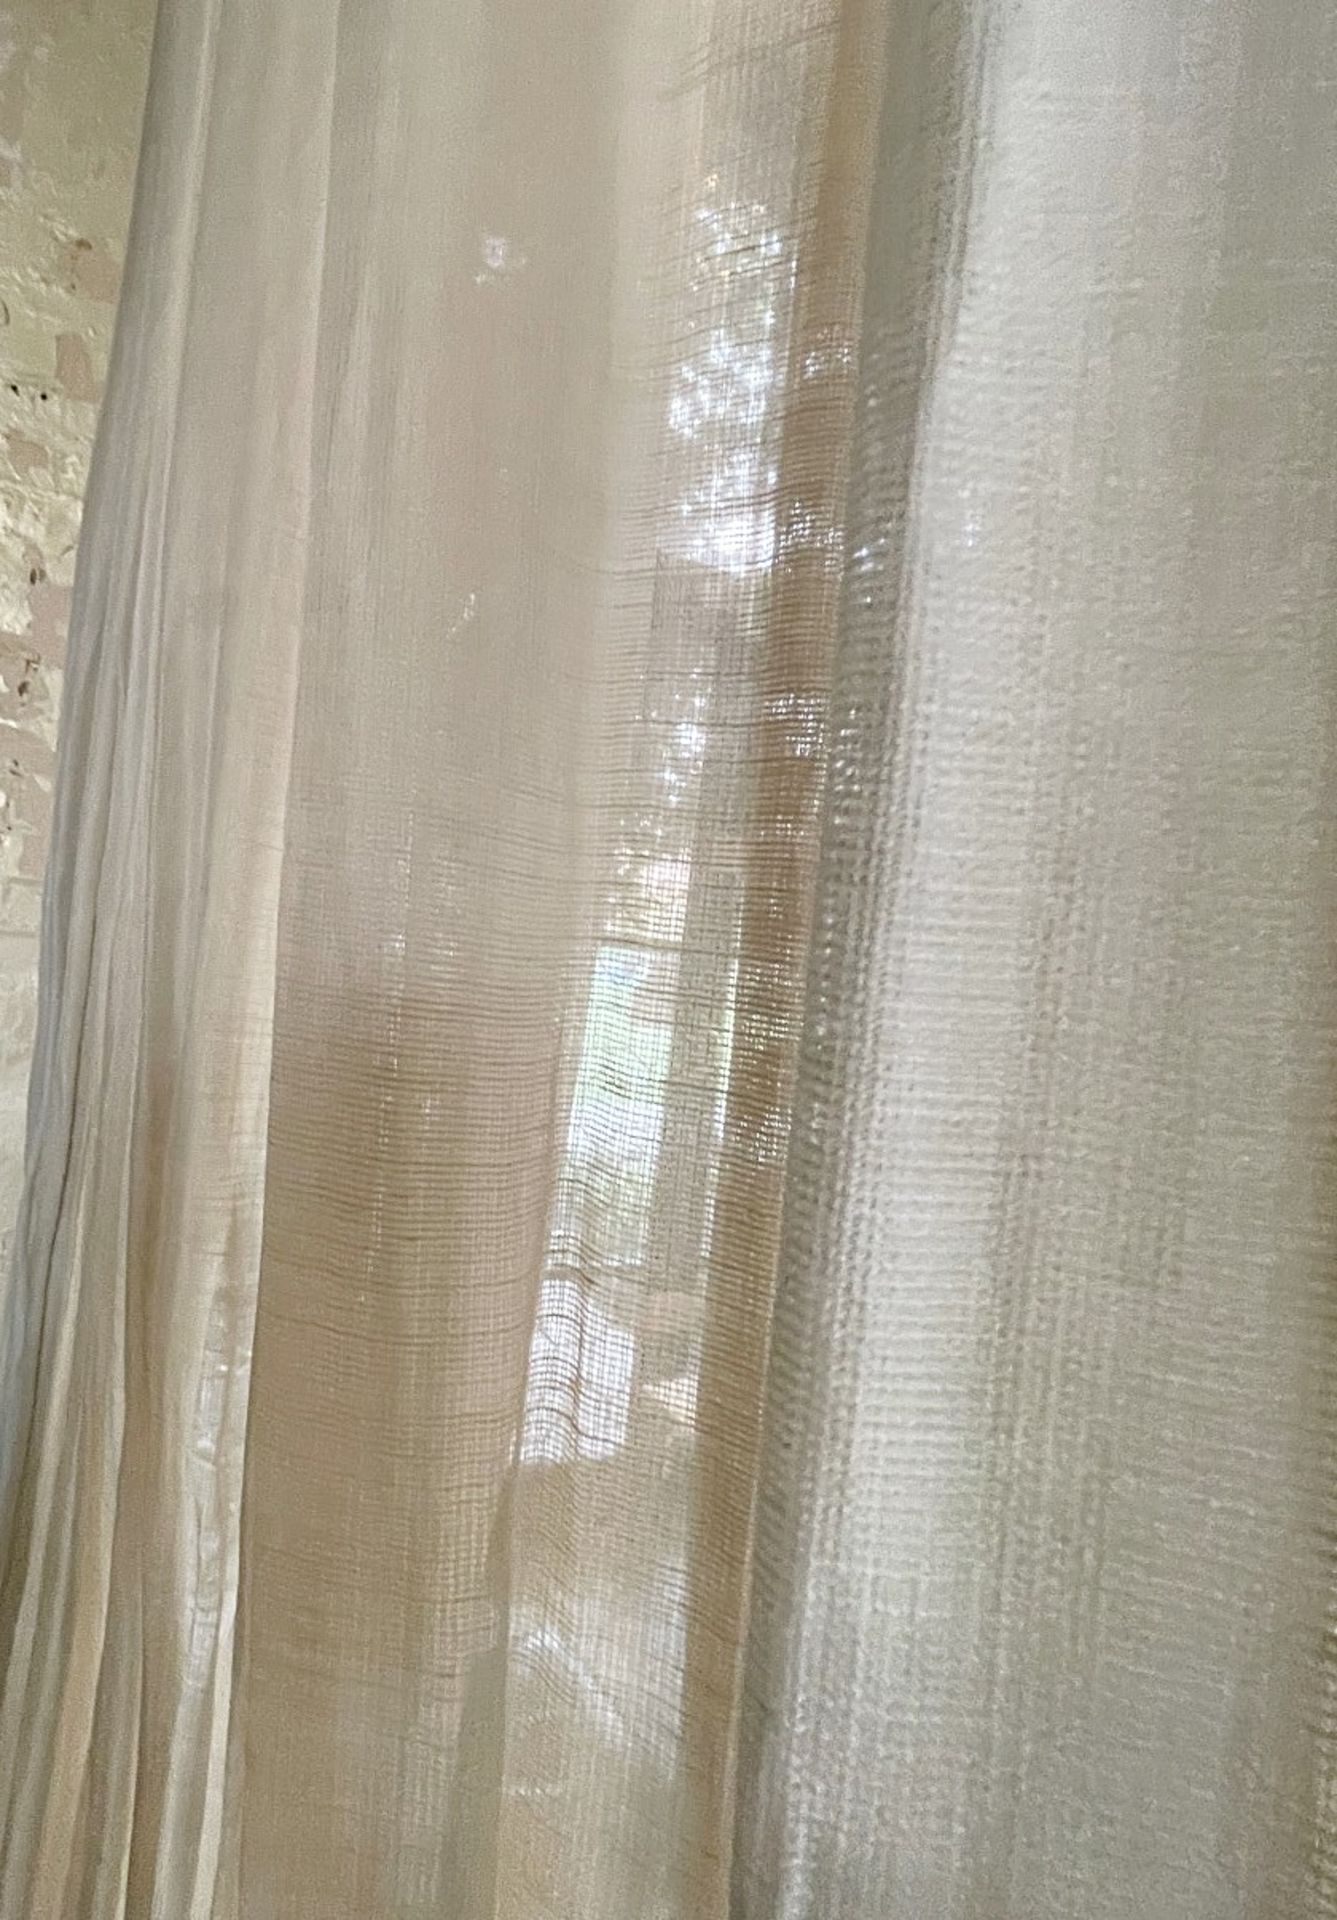 2 x Pairs Of Luxurious Silky Curtains With A Drop Of 18 To 20ft - Ref: BLVD116 - CL649 - Location: - Image 10 of 10